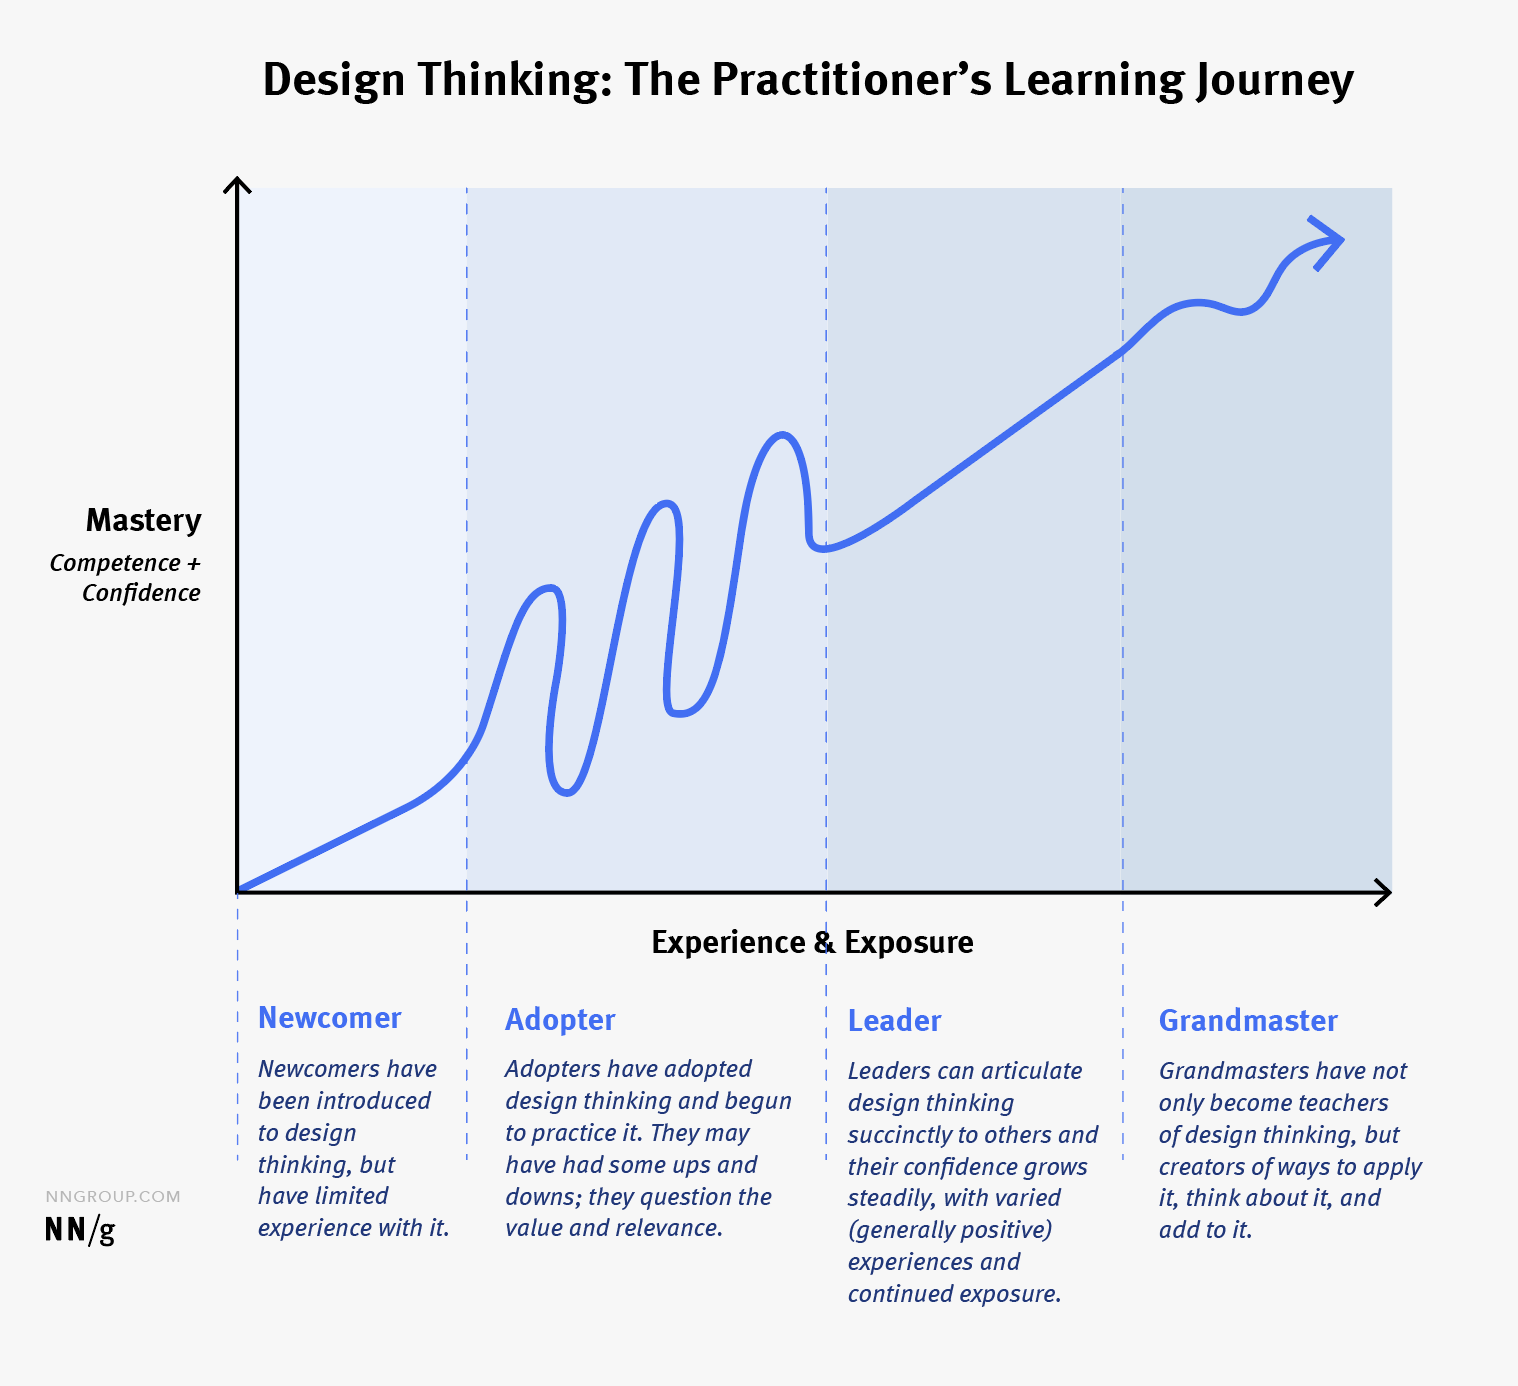 Design Thinking 4 Stages of Learning: Newcomer, Adopter, Leader, and Grandmaster.